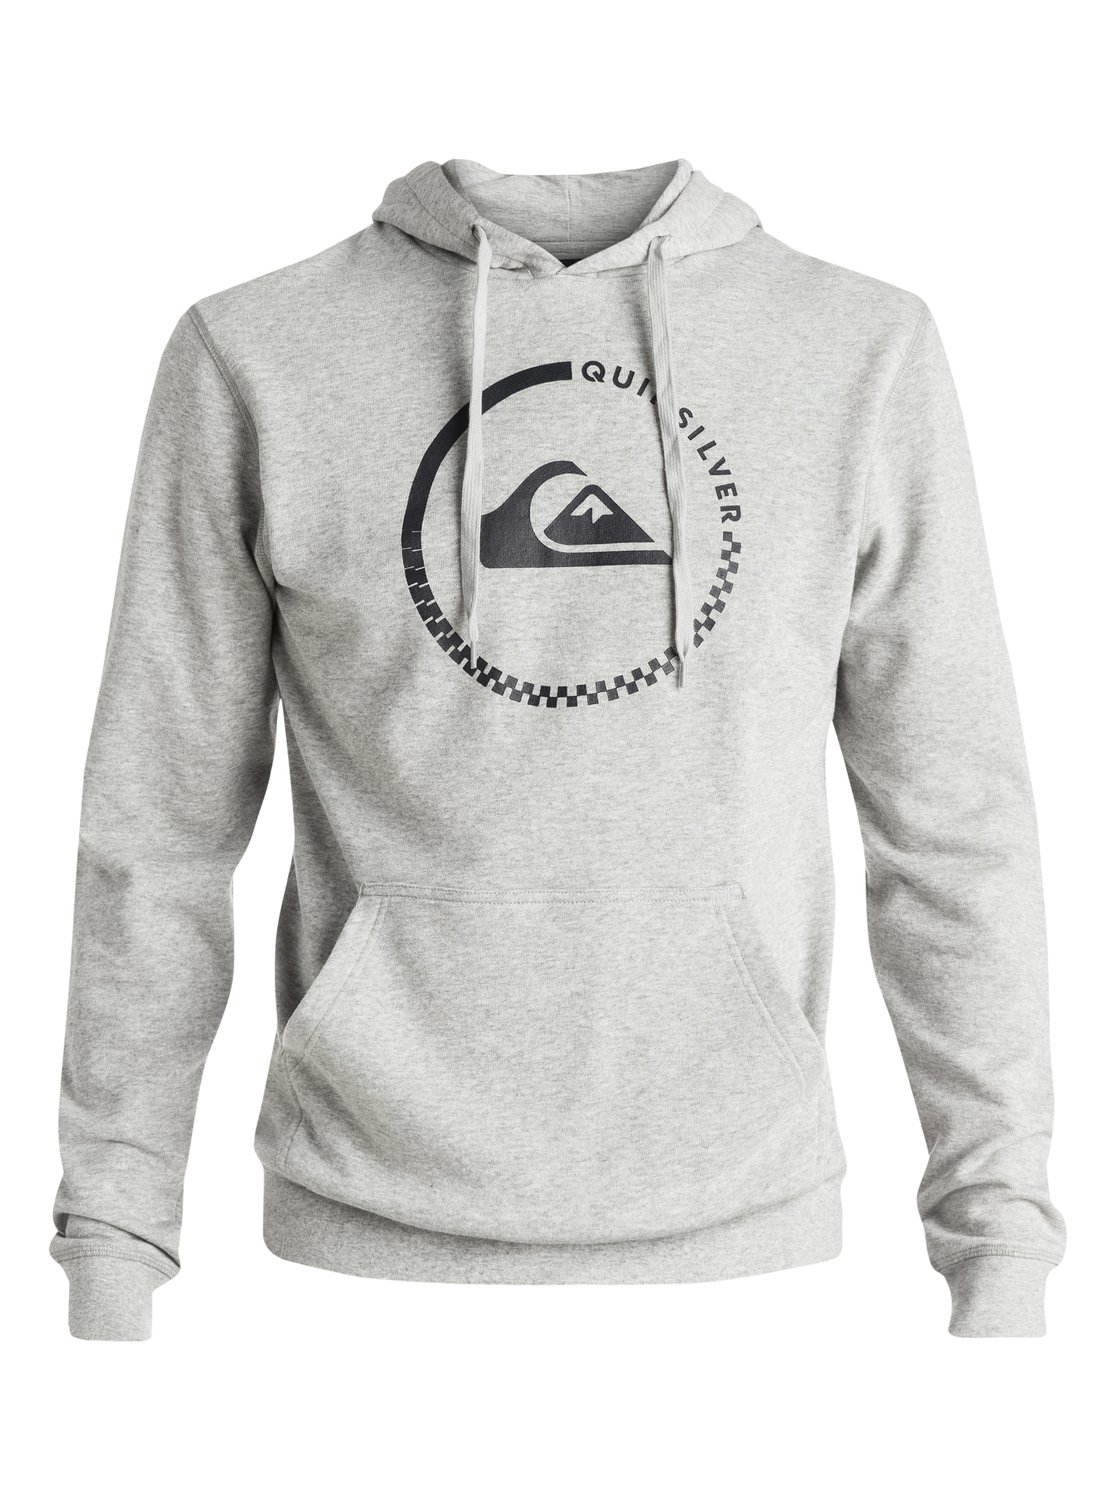 Everyday Active Check - Hoodie - Quiksilver<br>